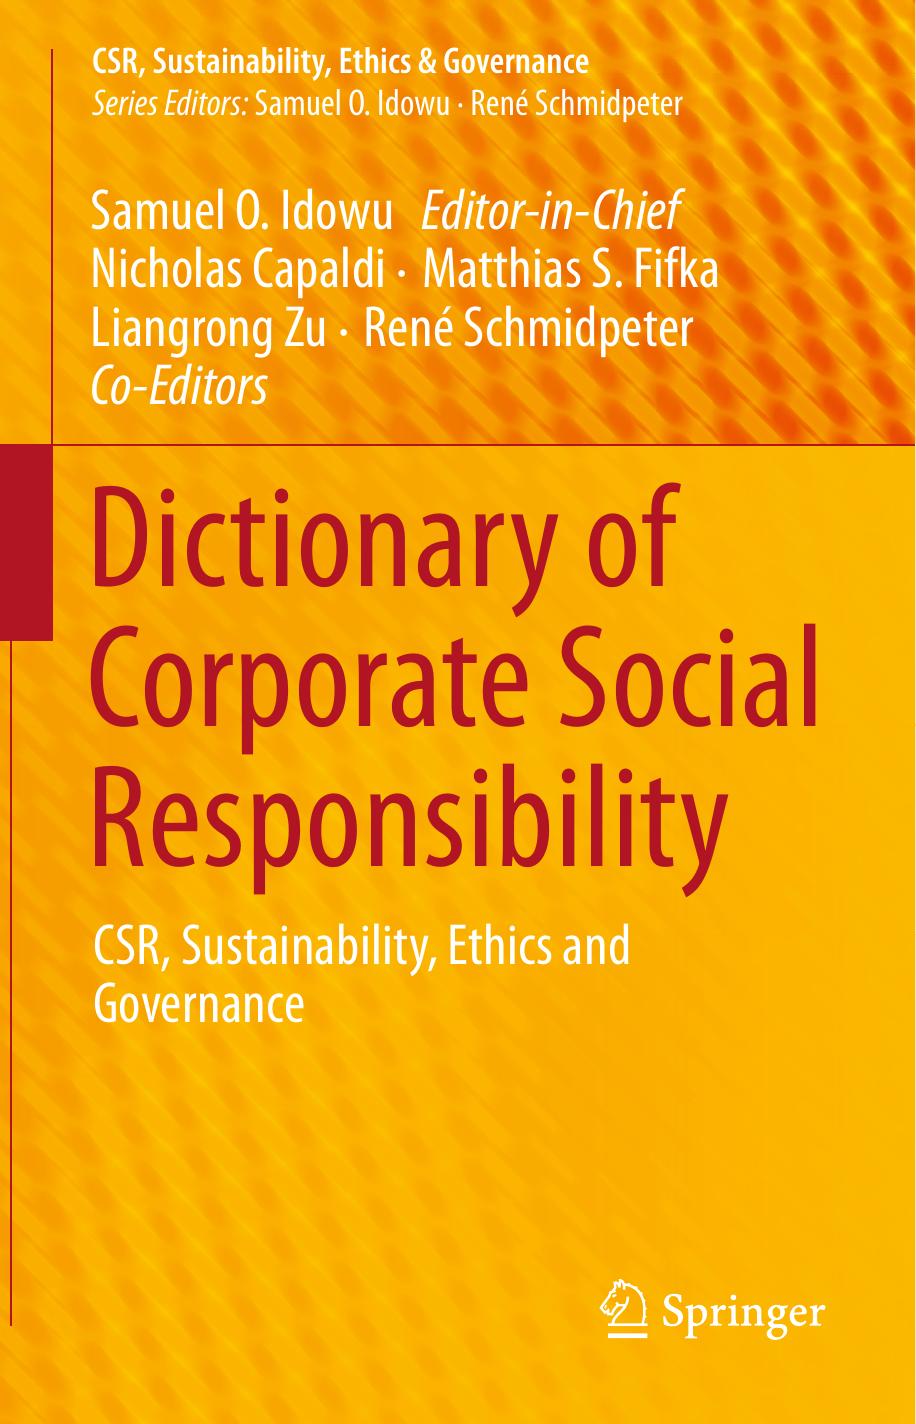 Dictionary of Corporate Social Responsibility  CSR, Sustainability, Ethics and Governance ( PDFDrive.com )